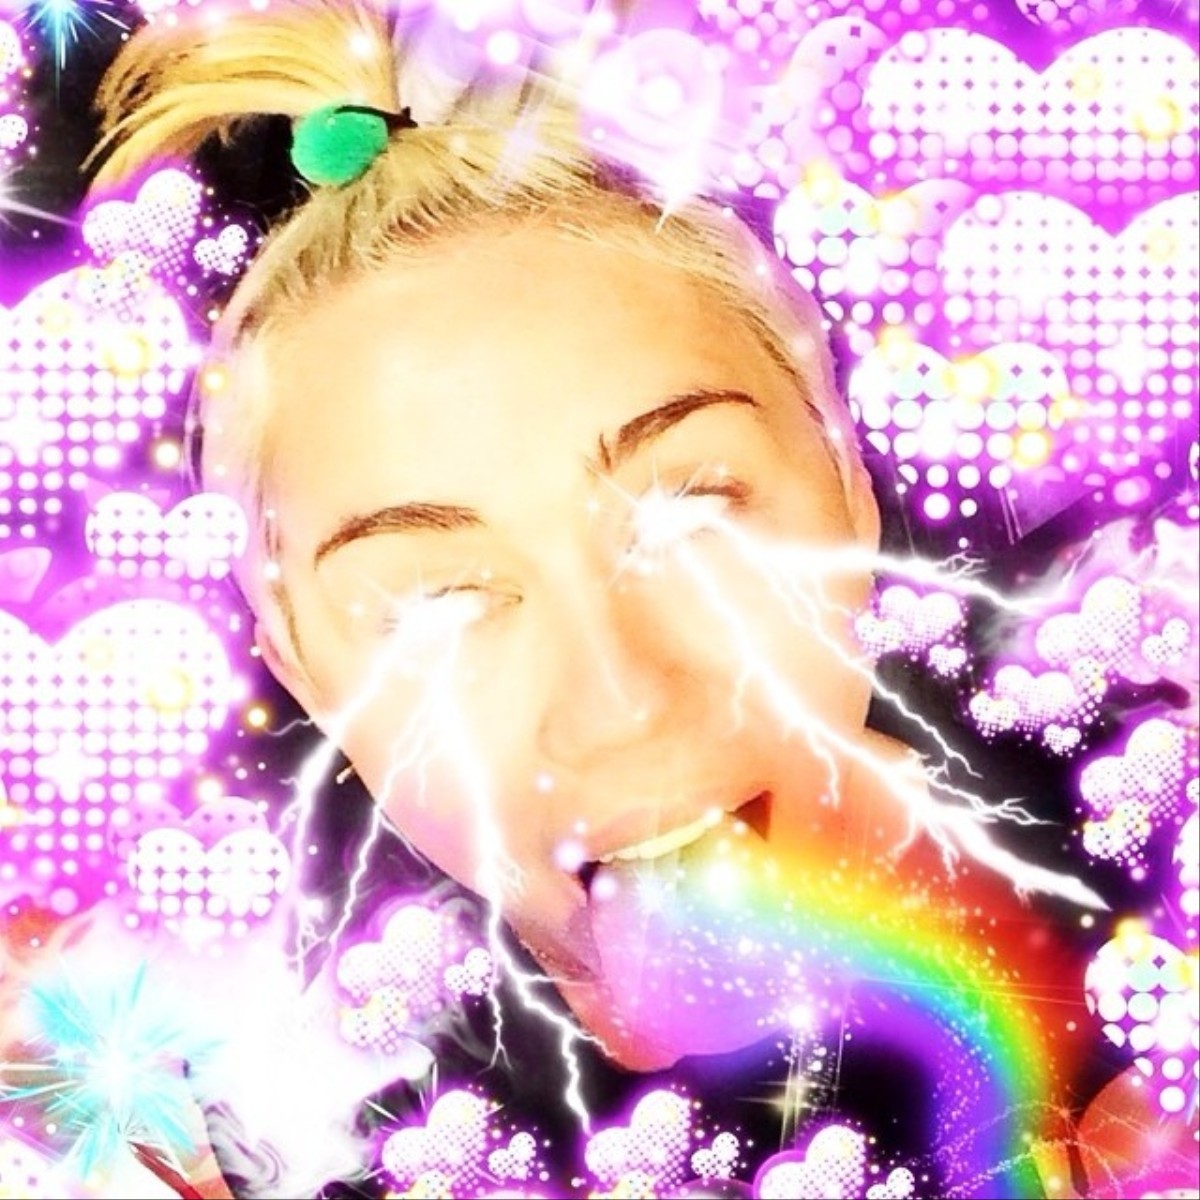 1200px x 675px - Miley Cyrus' Instagram Account Is Better Than a Million Art Museums Combined